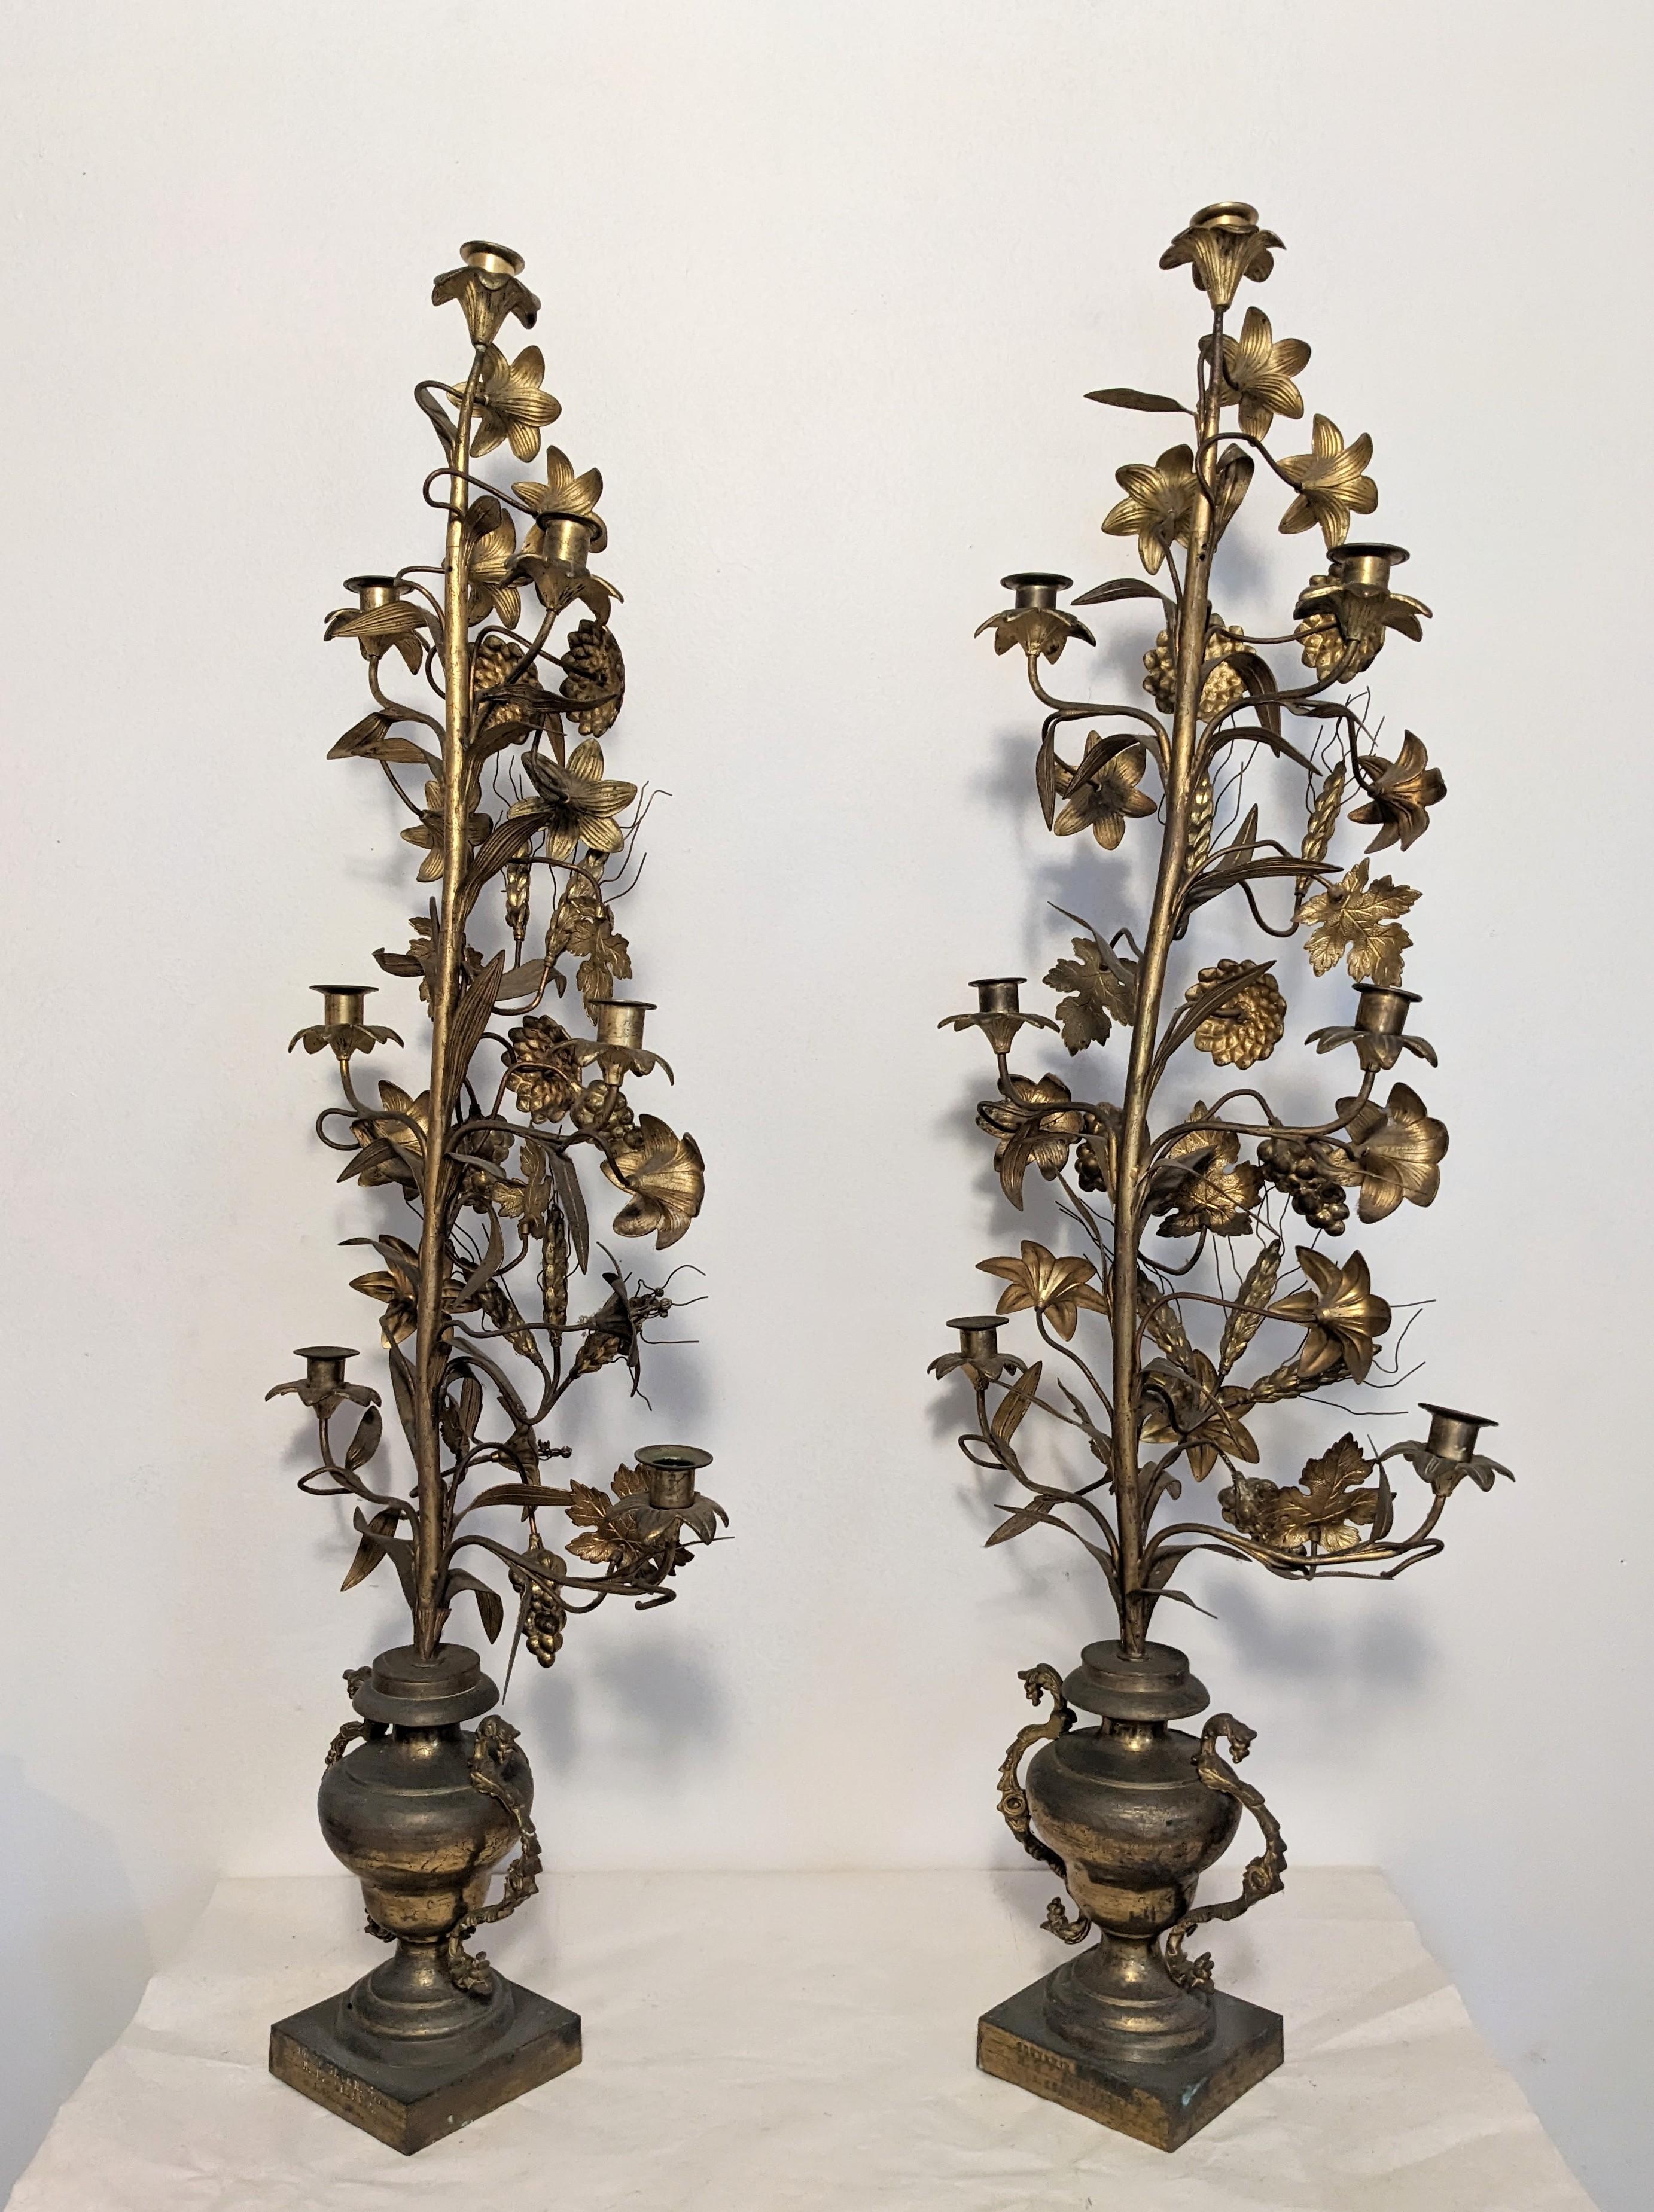 Striking pair of Victorian French bronze candleabra, Marriage Gift from the late 19th Century. Heavy bronze bases with family cartouche and brass floral topiaries with a multitude of different flowers and wheat motifs above. Inscribed with dates on